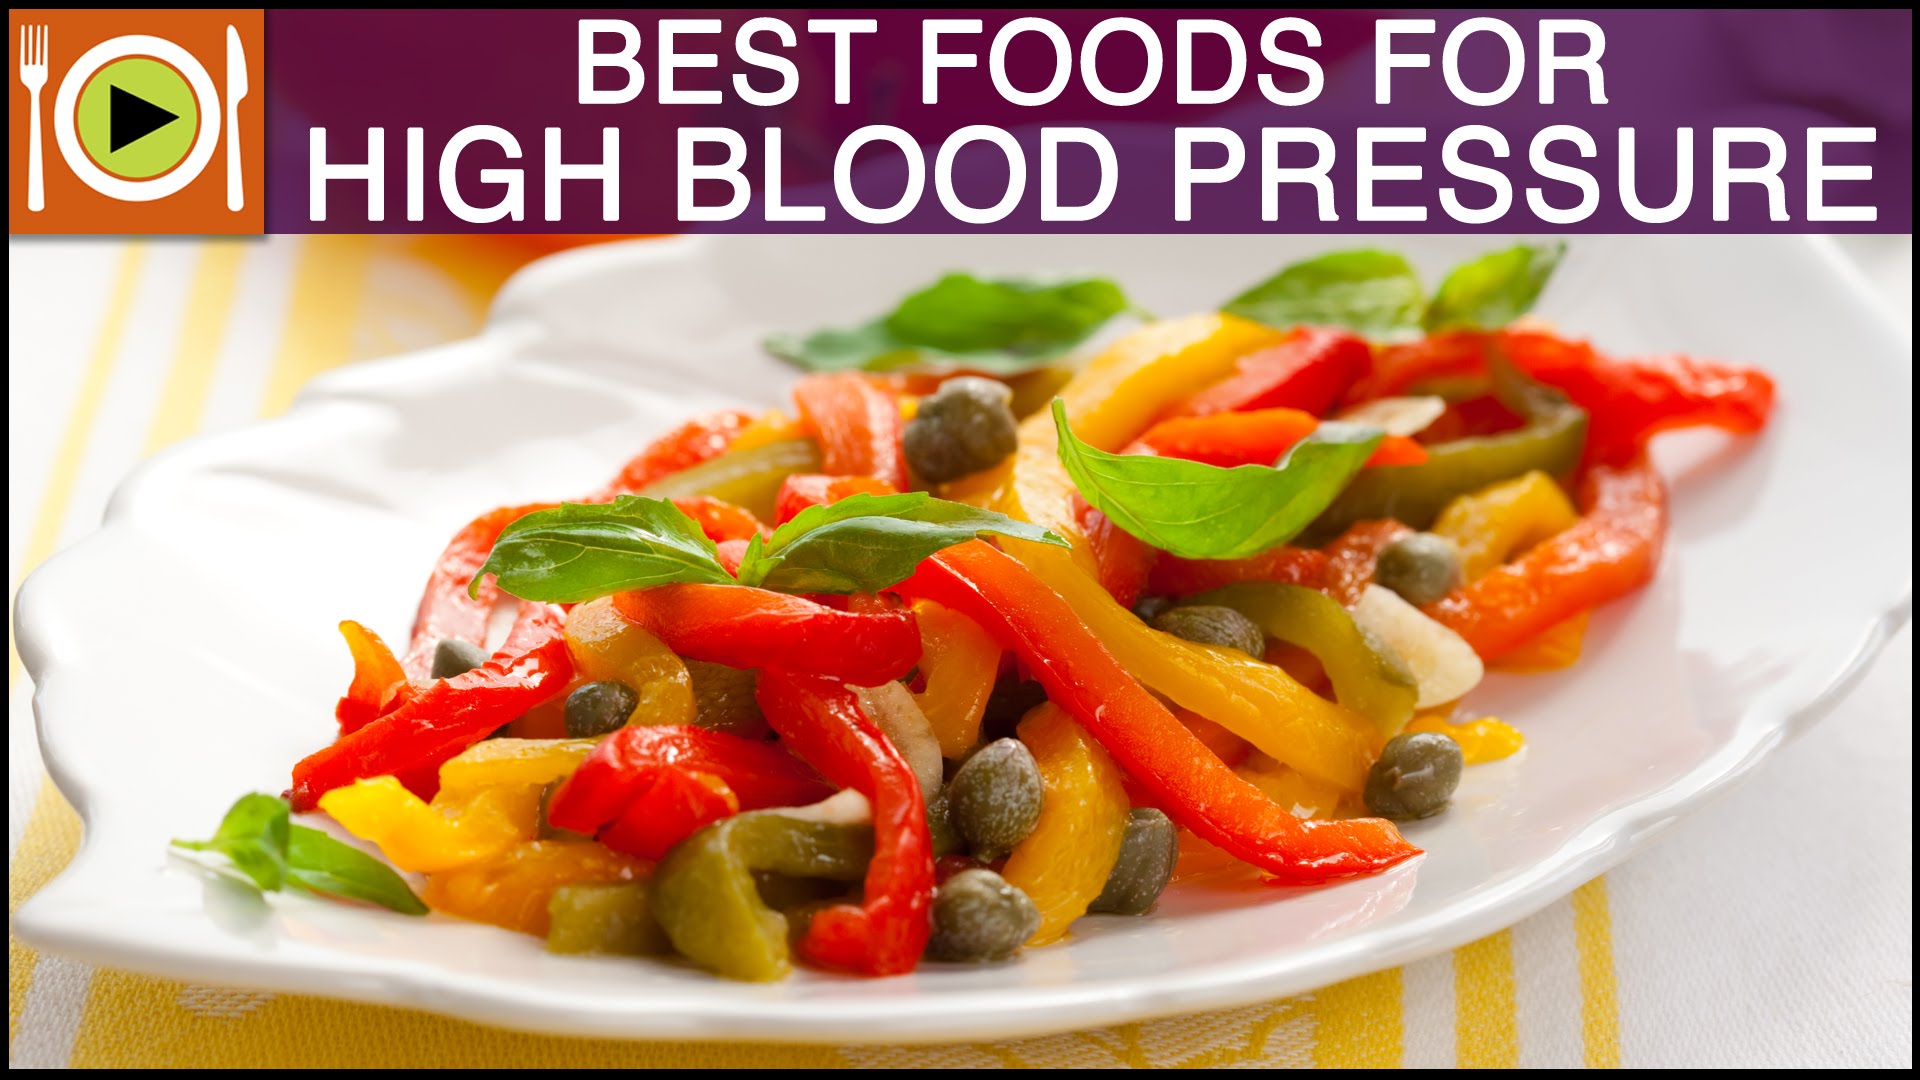 blood pressure won't knock you down with these wonder food items